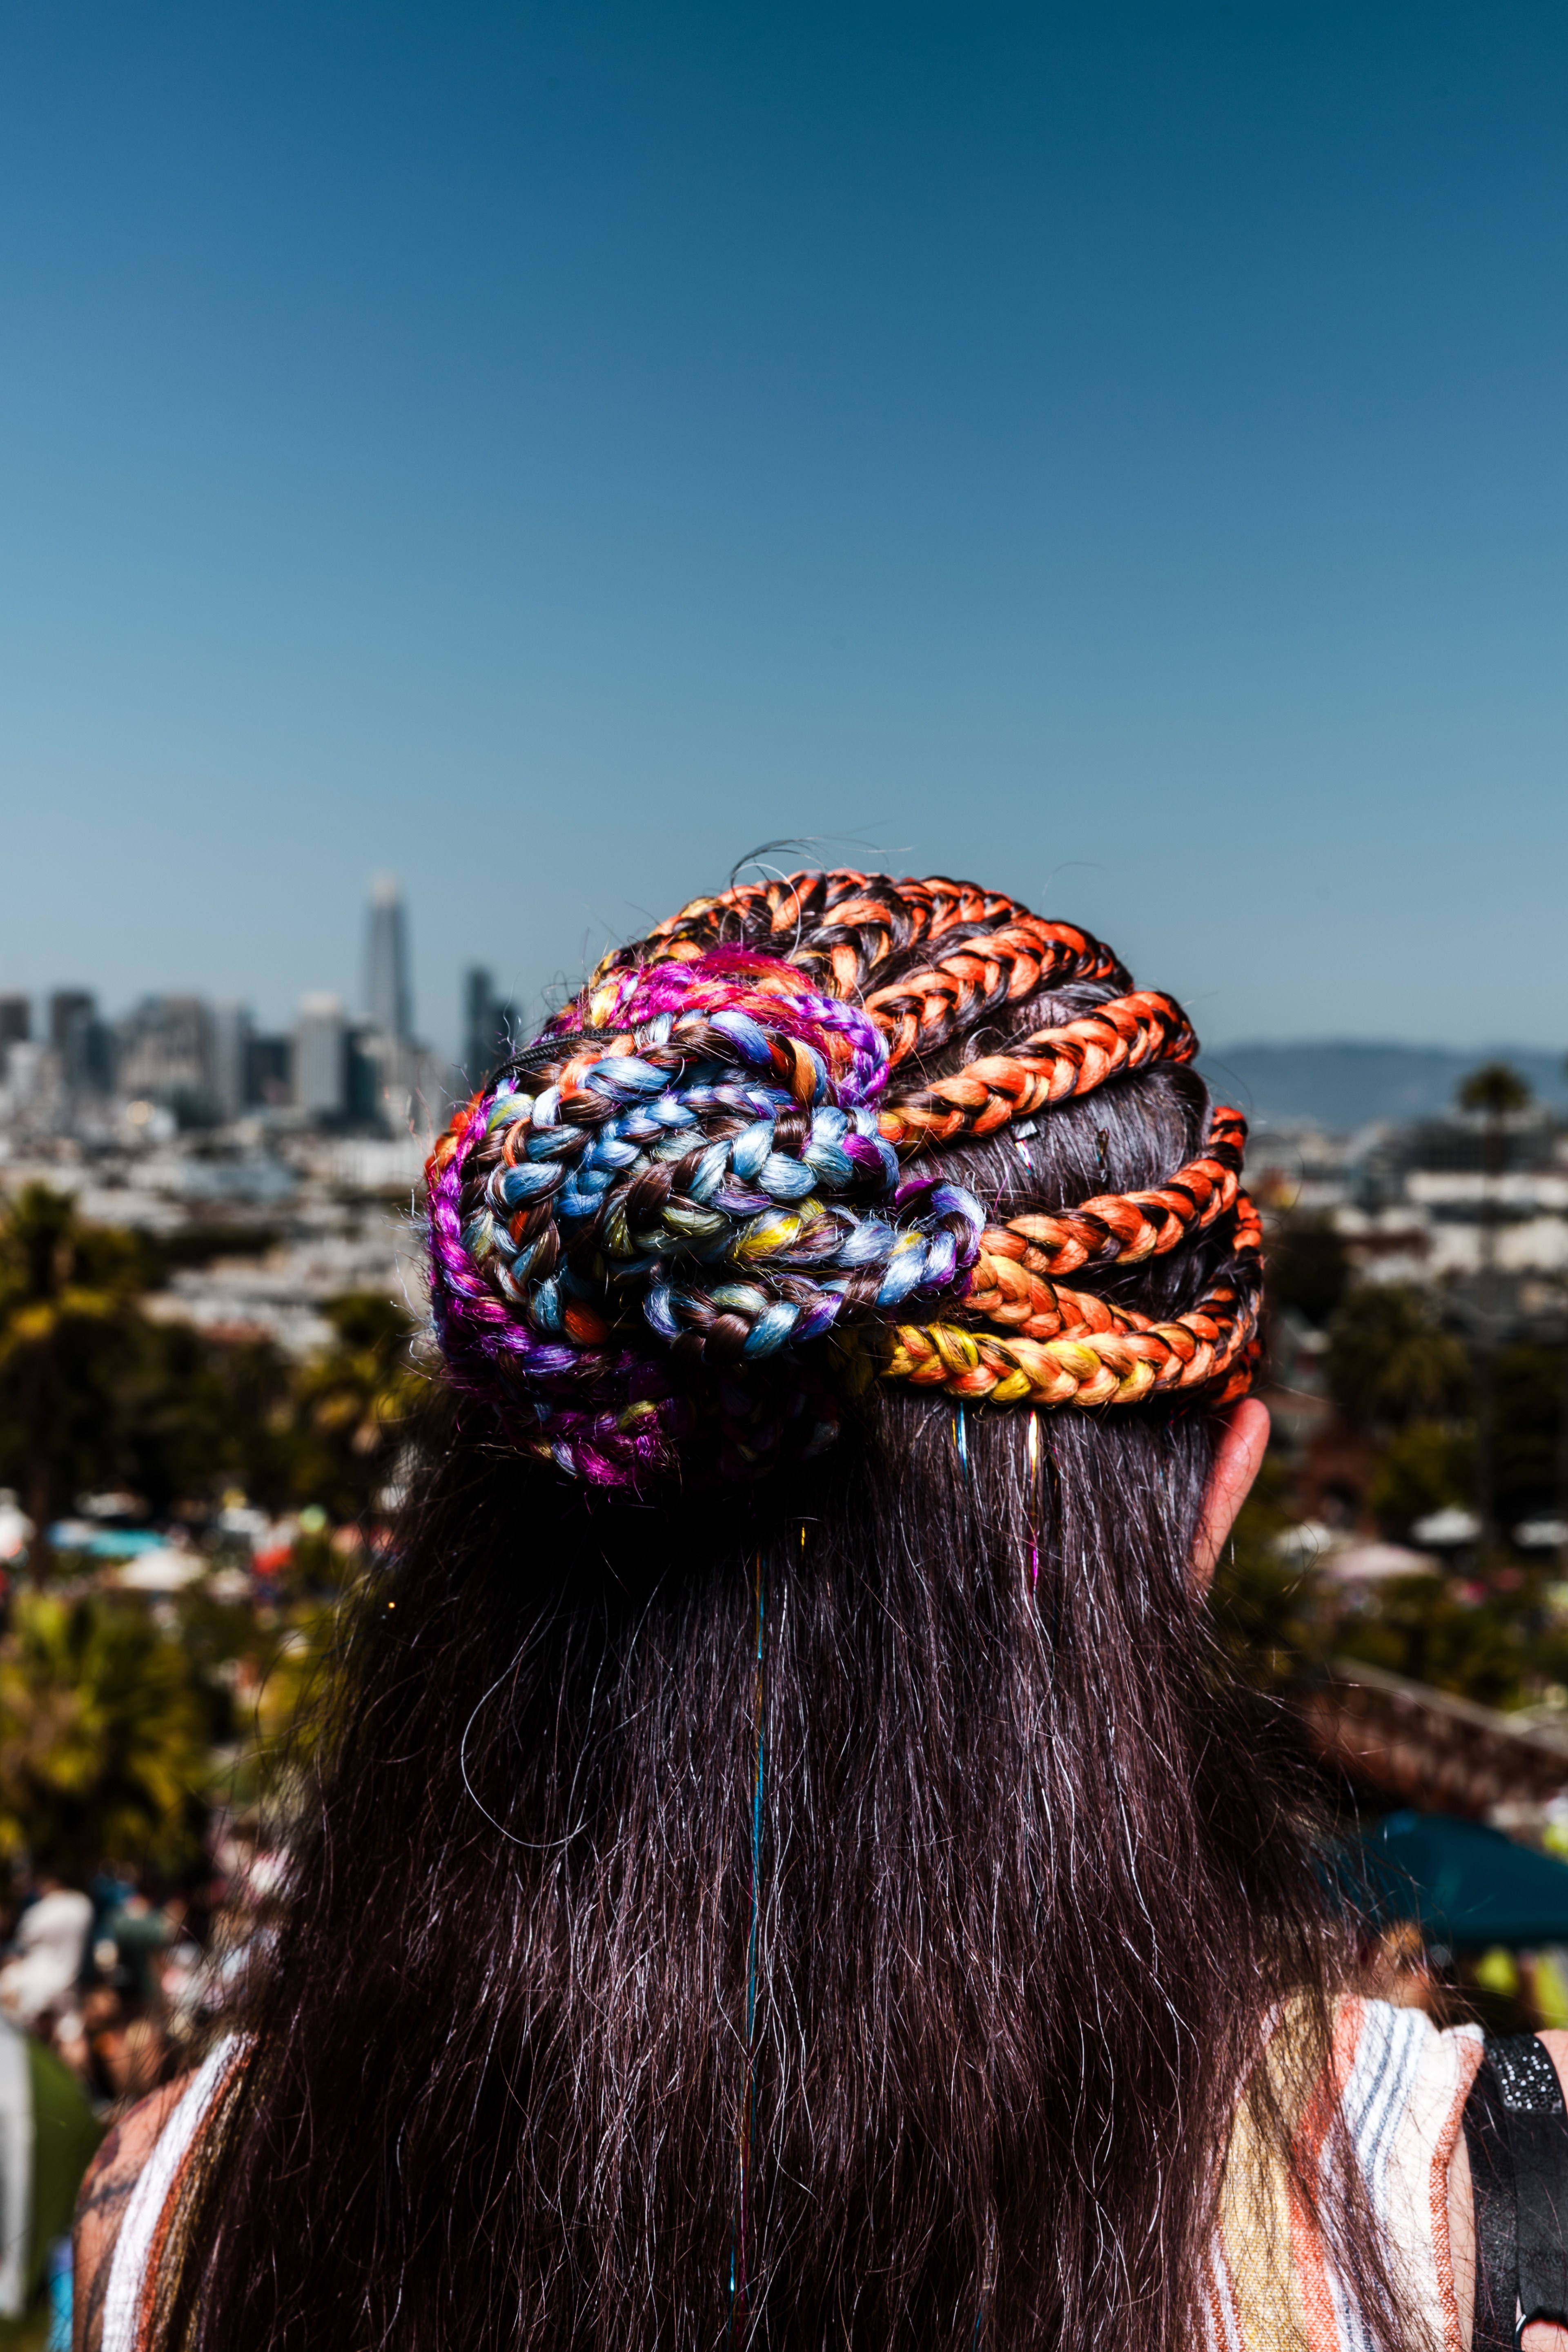 A person is seen from behind with dark hair intricately braided in colorful rainbow hues, set against an outdoor backdrop of a city skyline under a clear blue sky.